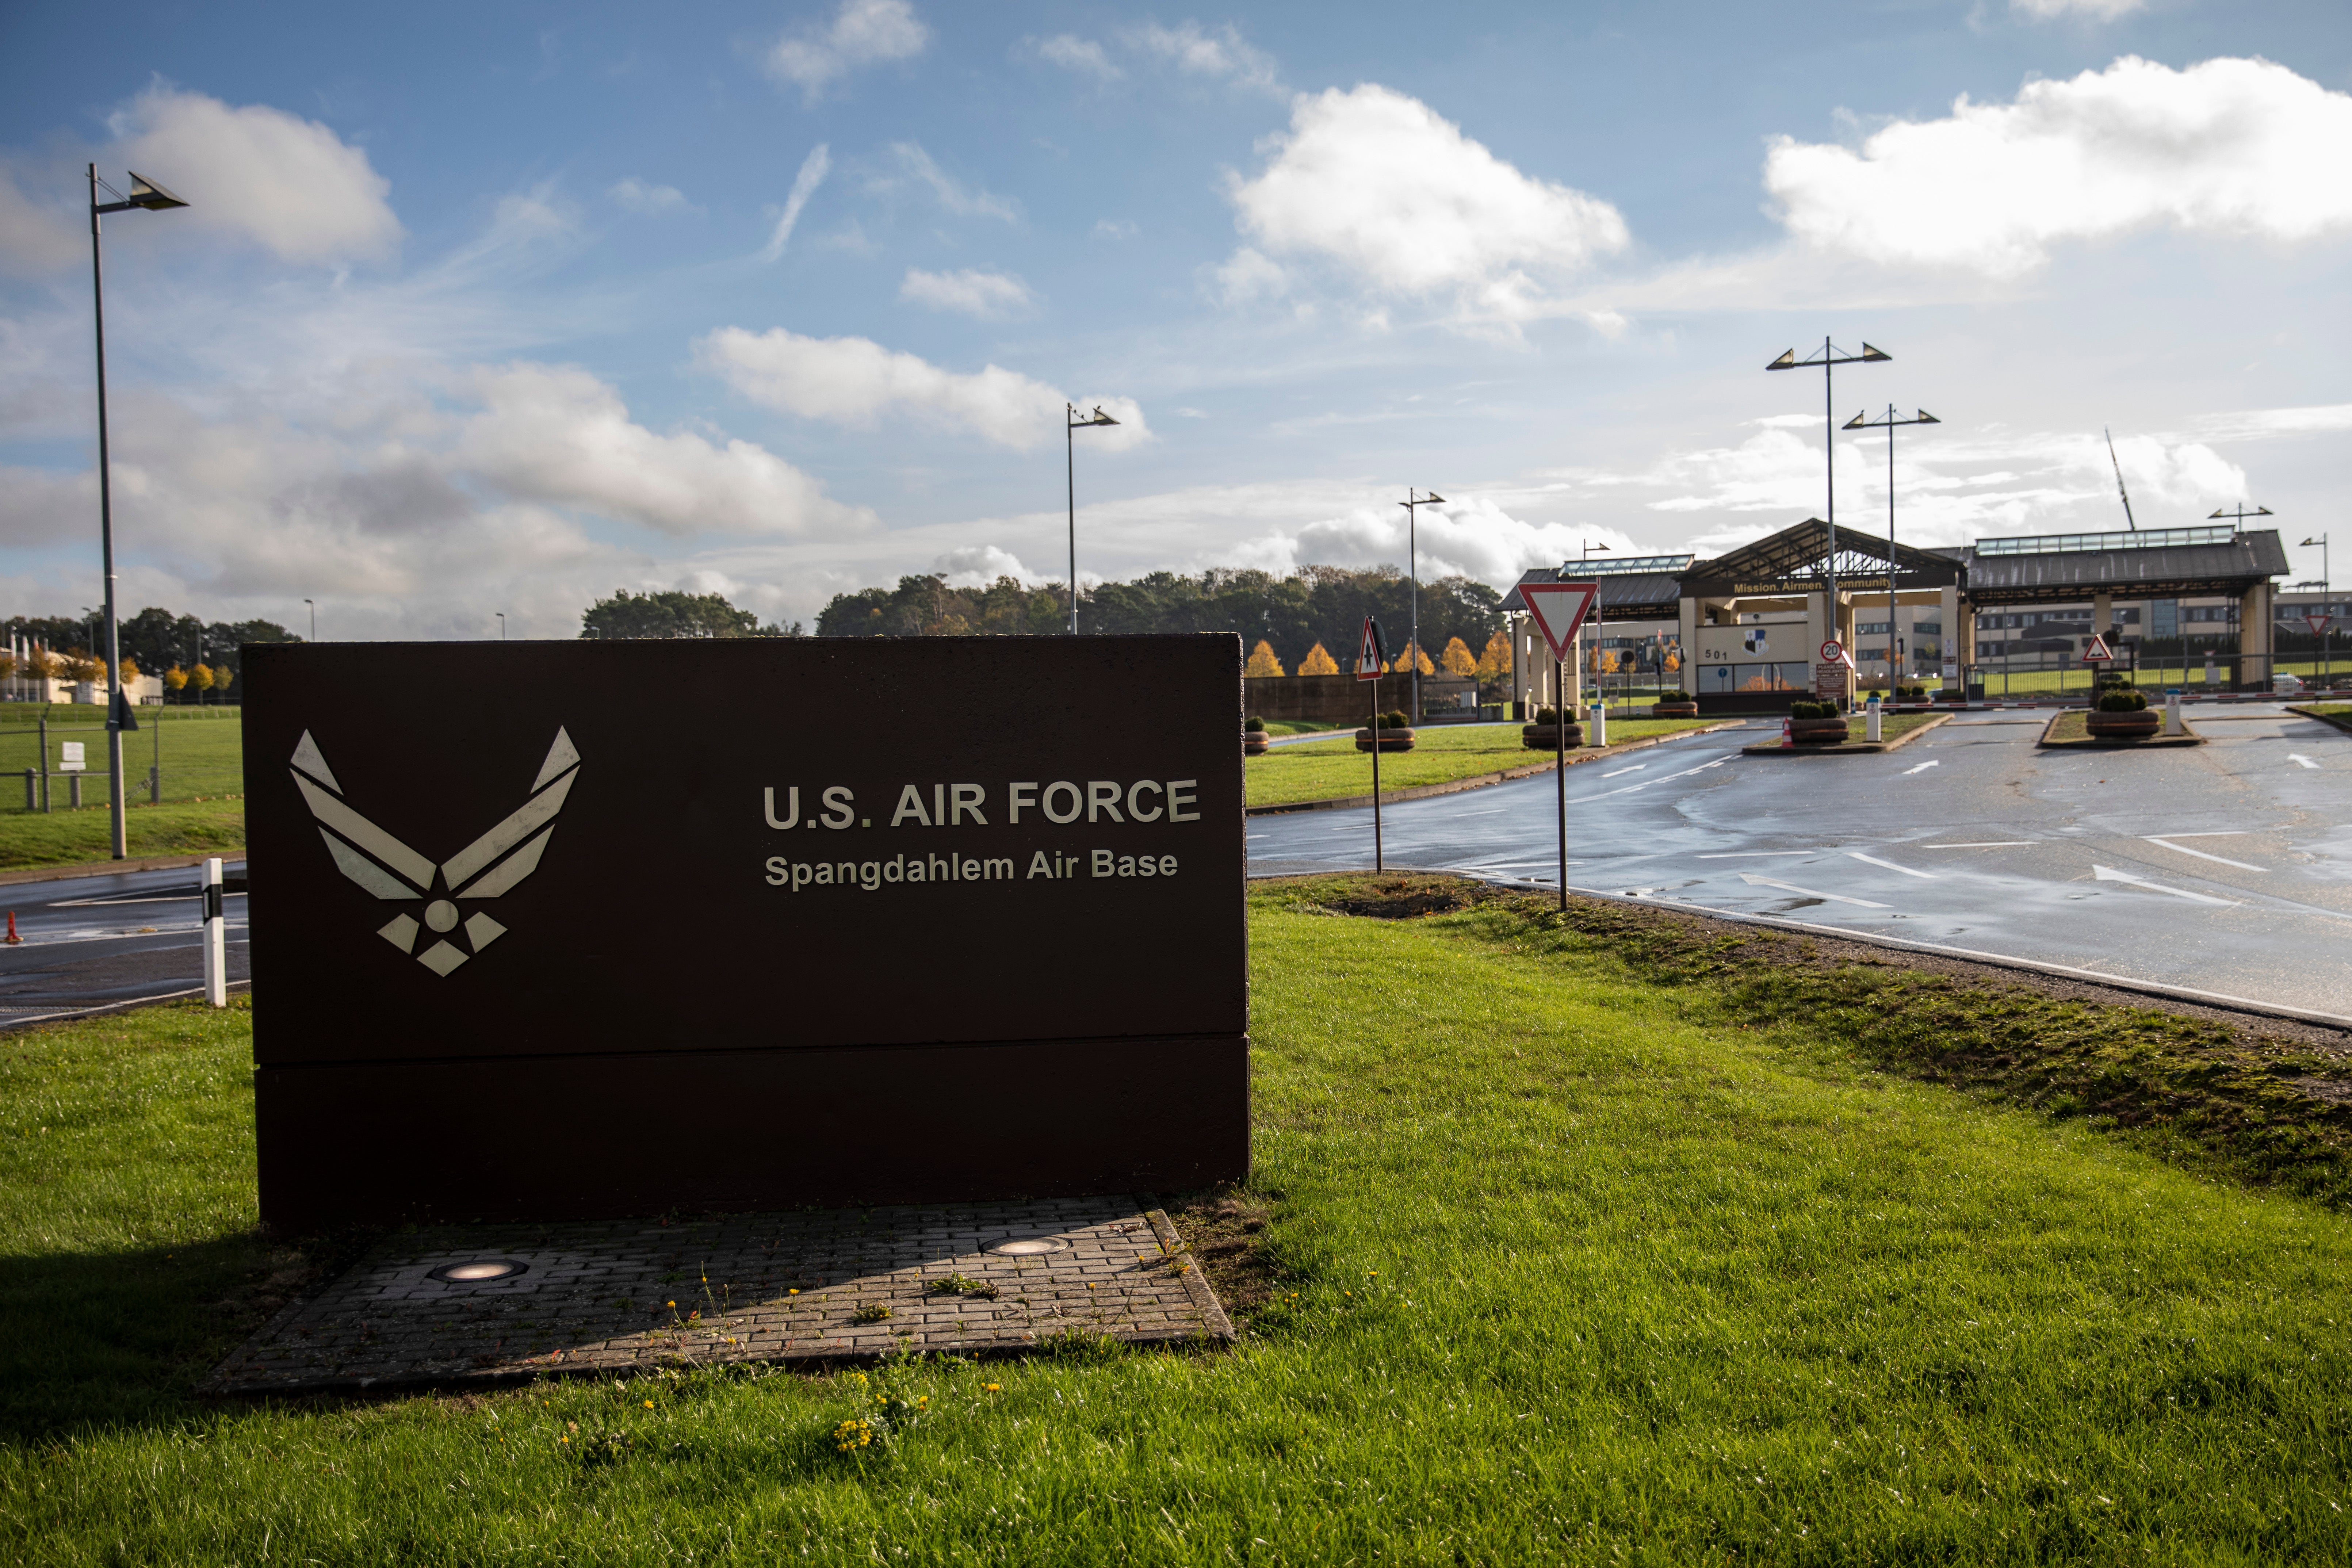 The sign of the US Air Force Spangdahlem Air Base, Germany